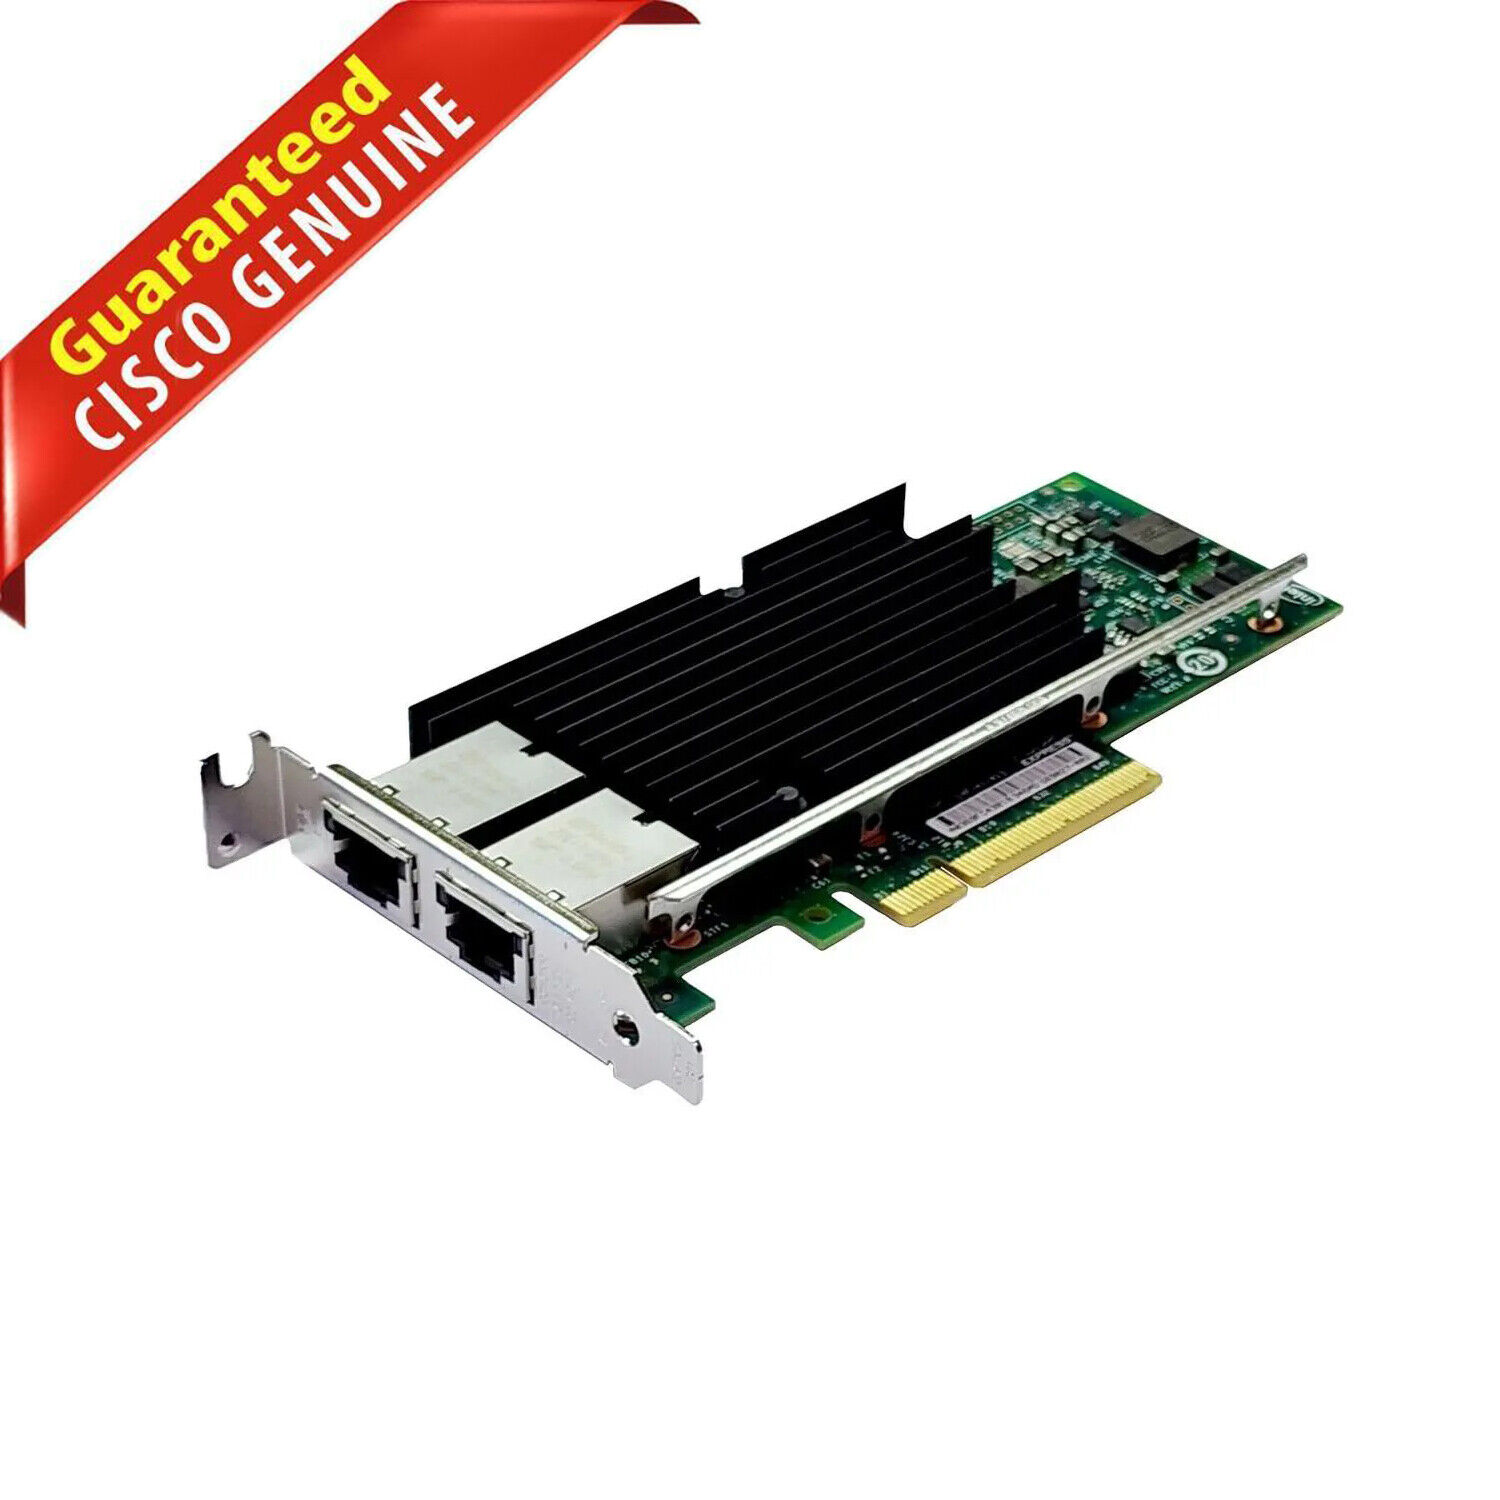 Cisco UCSC-PCIE-ITG X540-T2 10GBase-T PCI-e 2x RJ-45 Network Adapter 74-11070-01